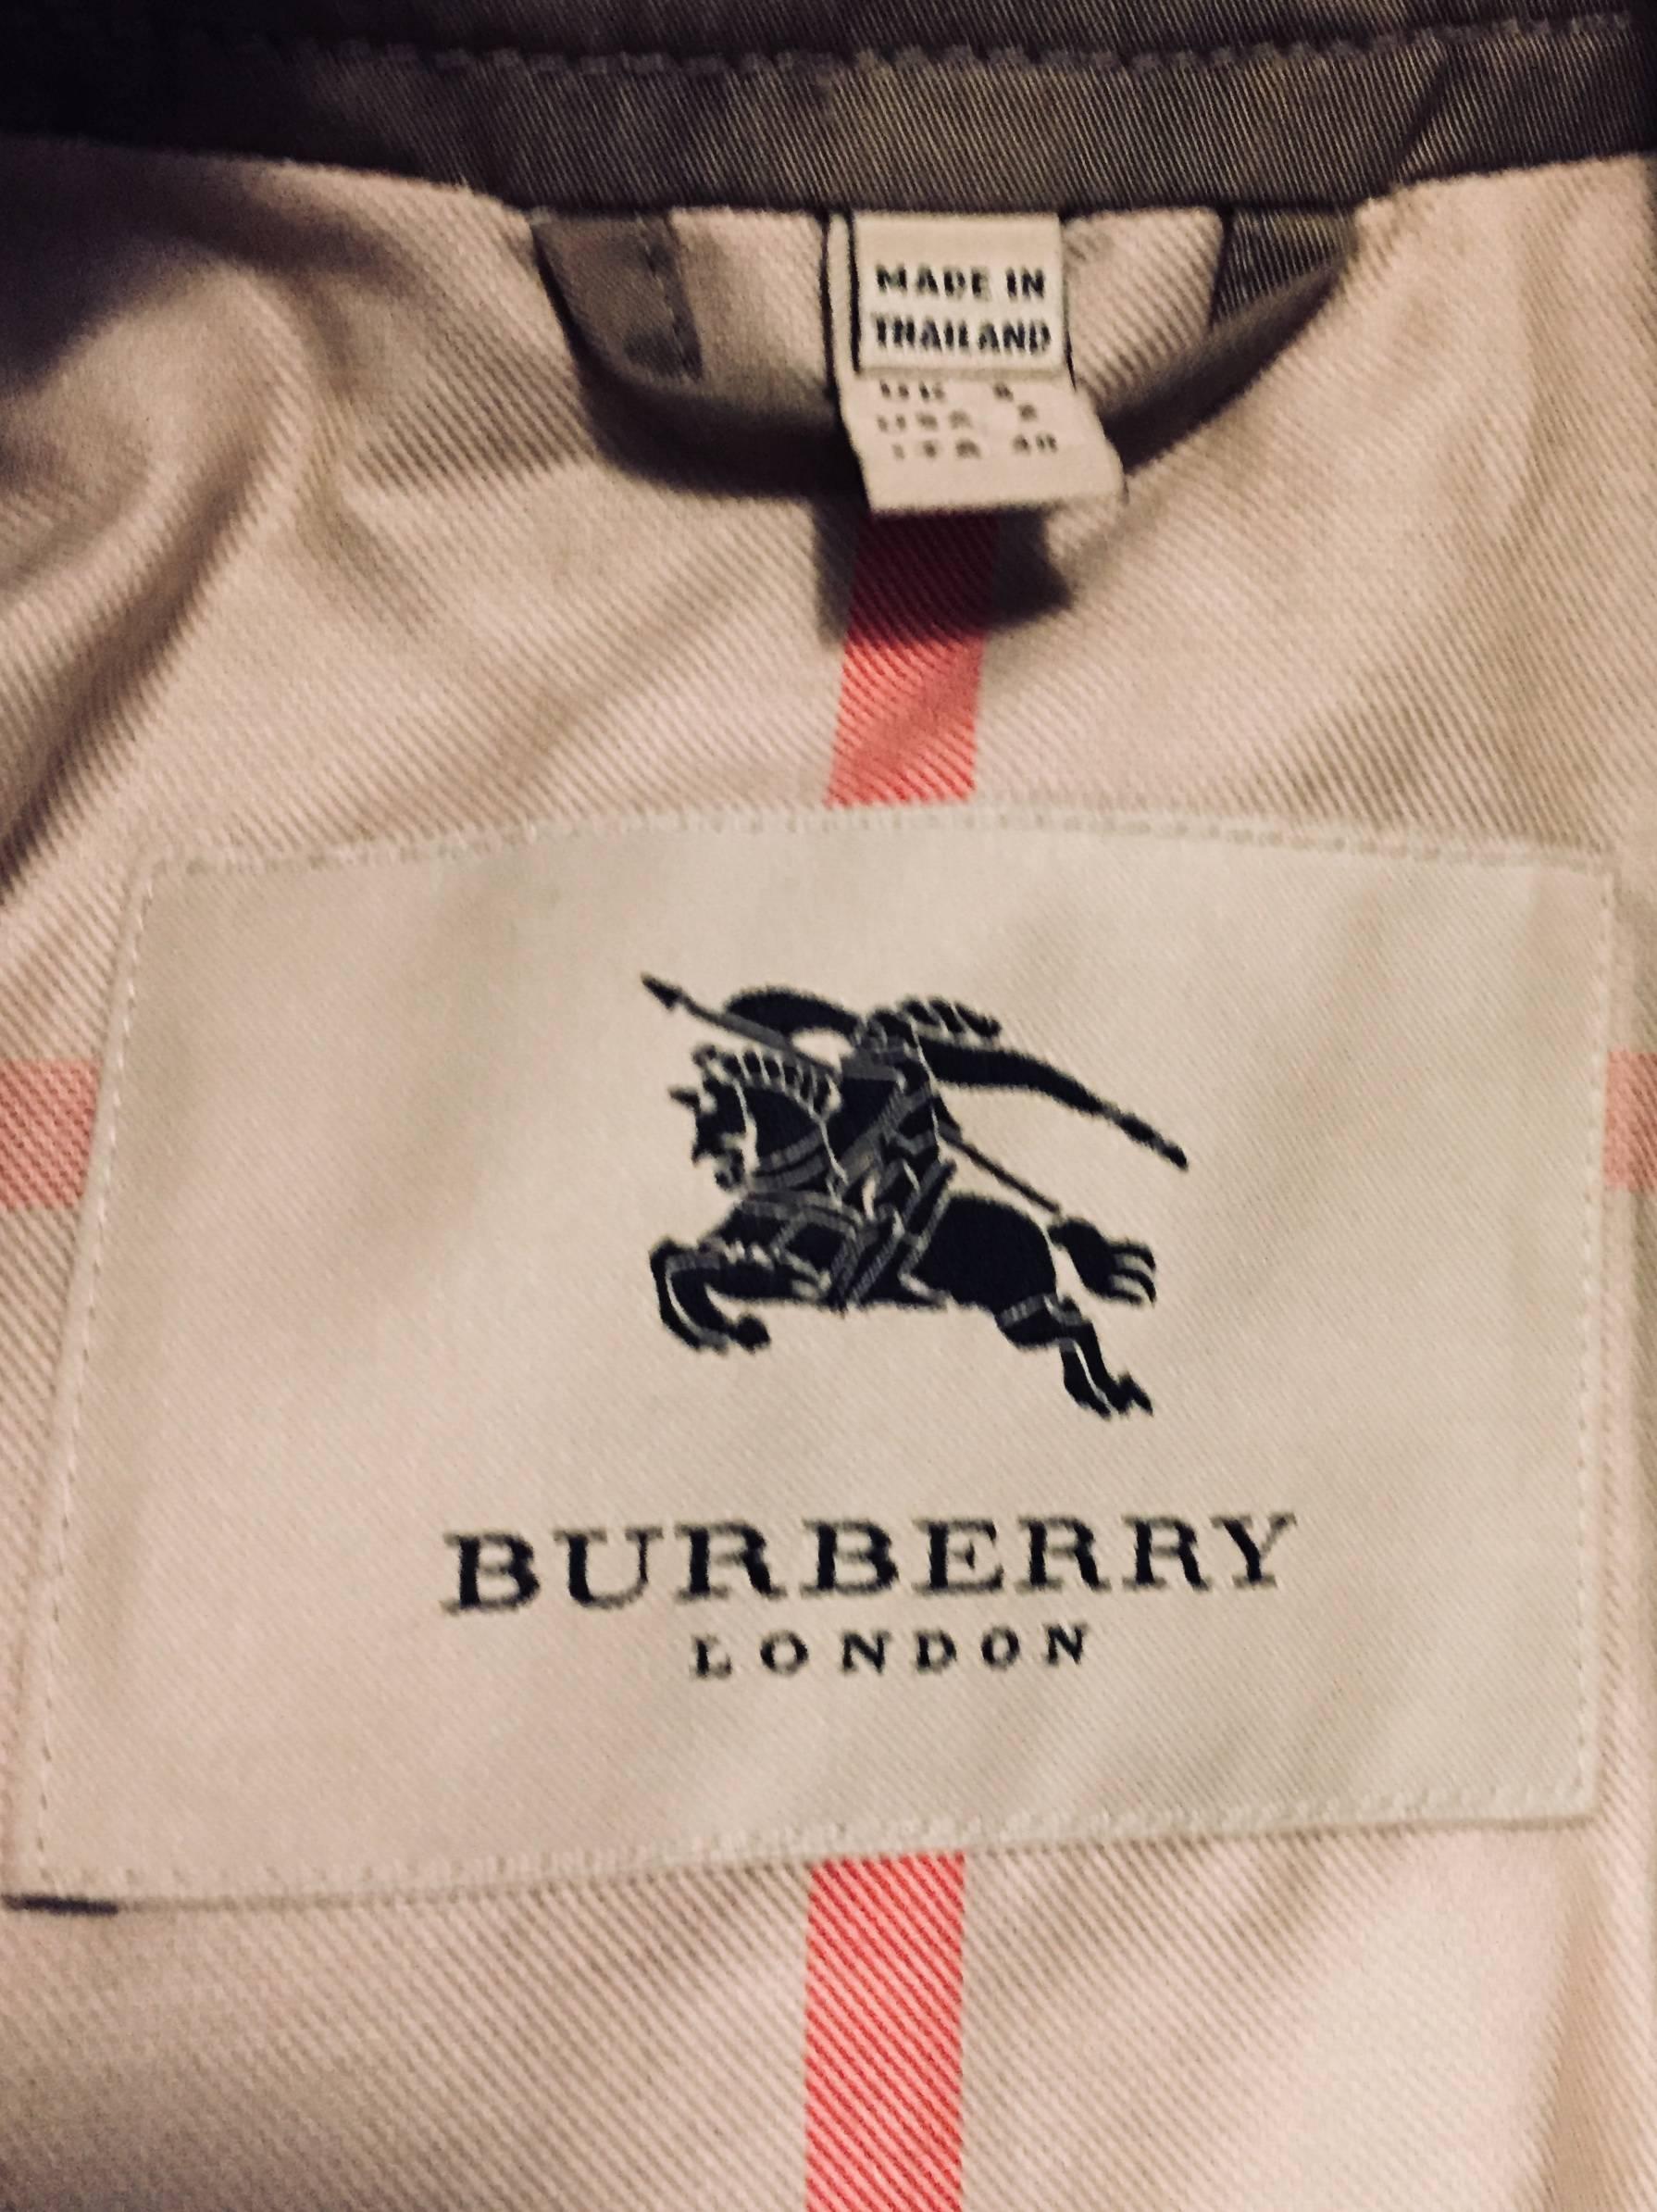 Burberry Military Style Taupe Short Sleeve Top In Excellent Condition For Sale In Palm Beach, FL